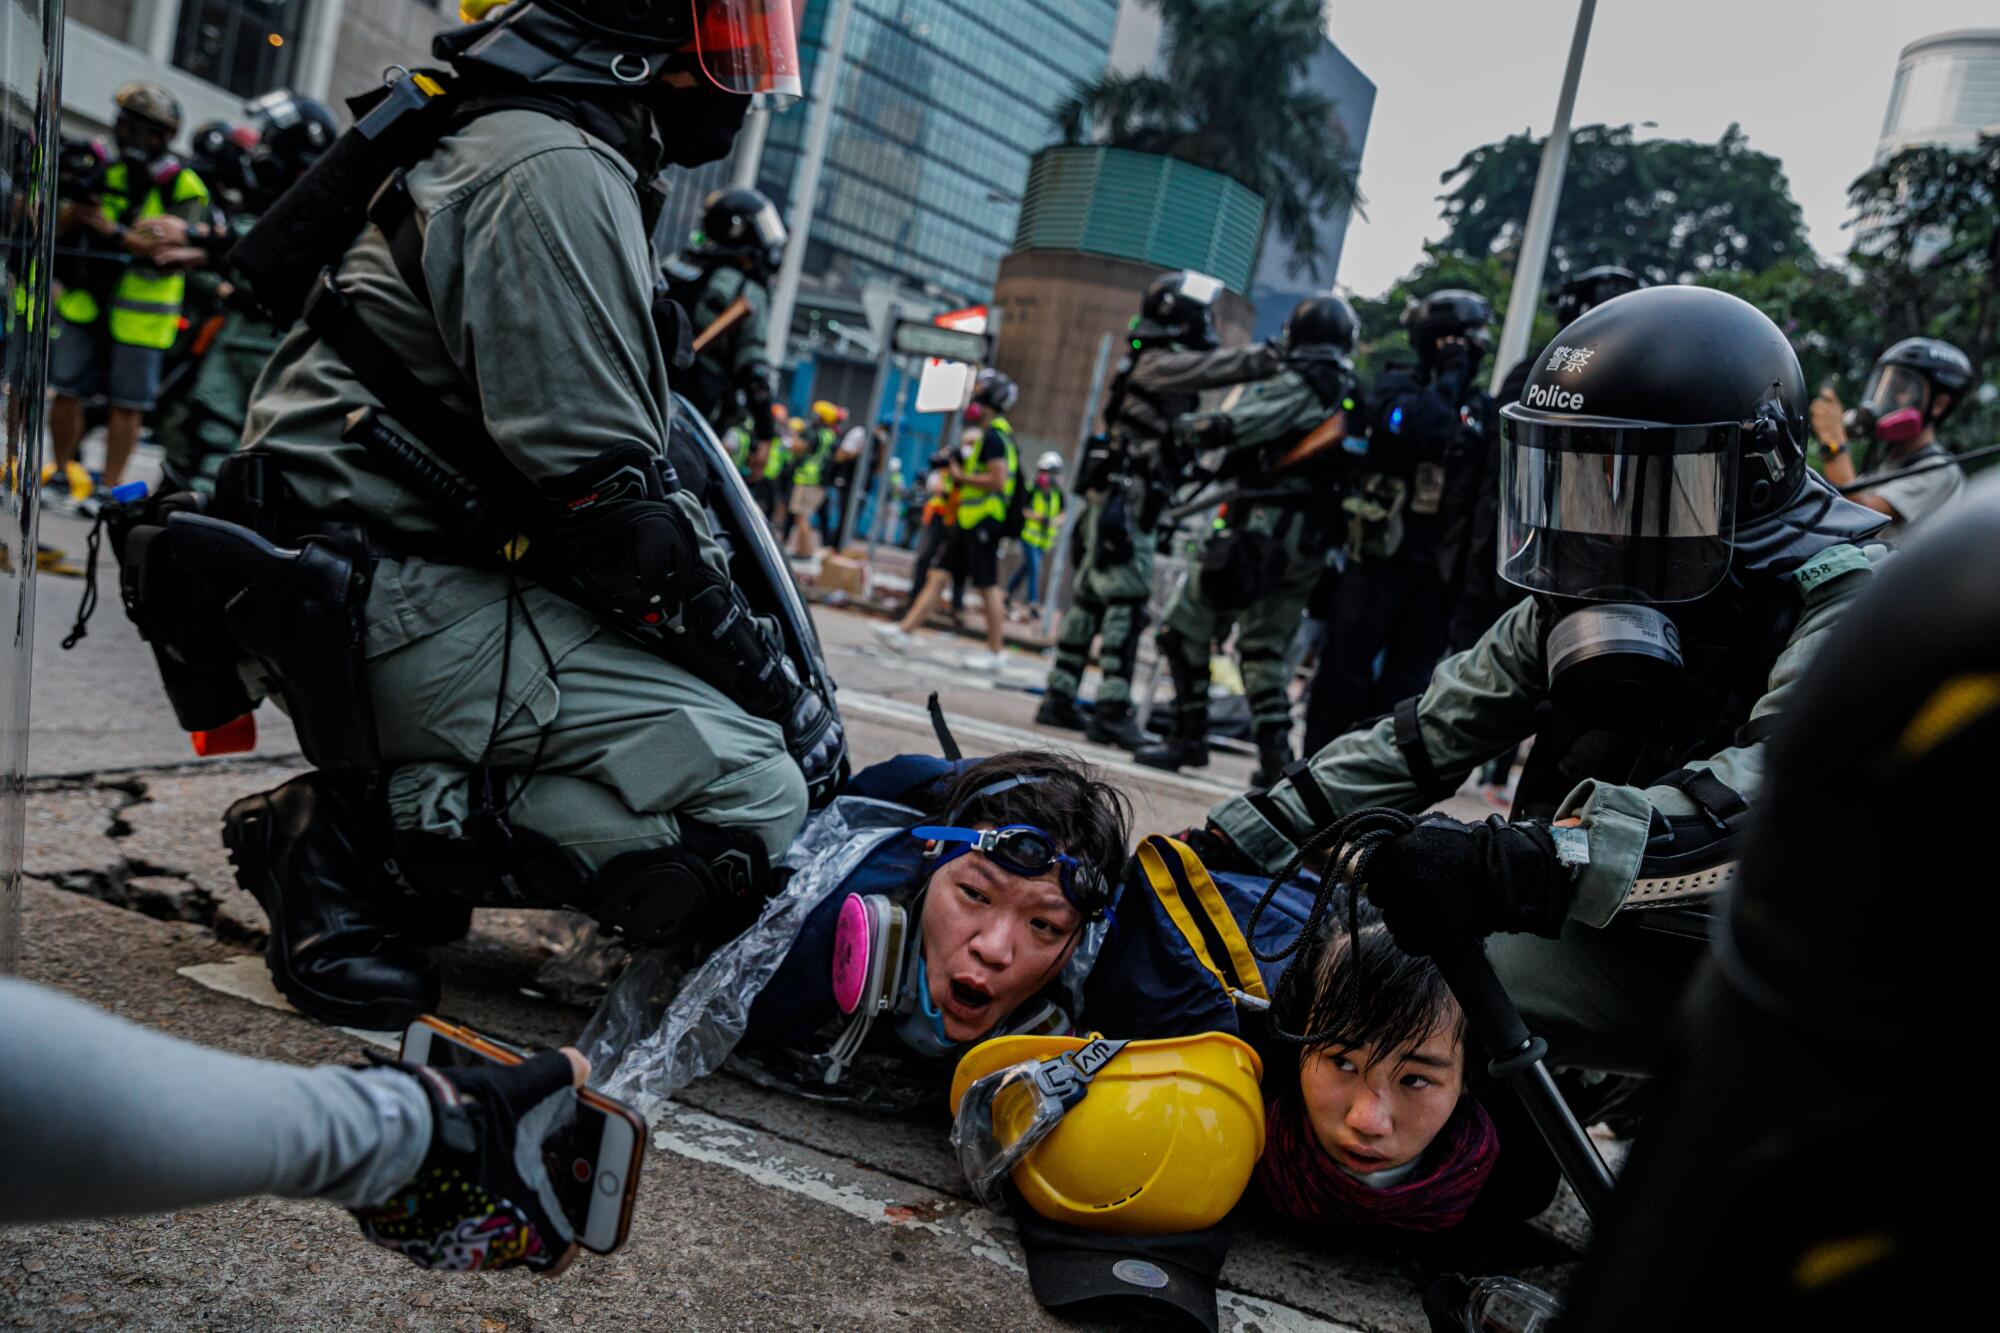 Two protesters are pinned down by police in riot gear 